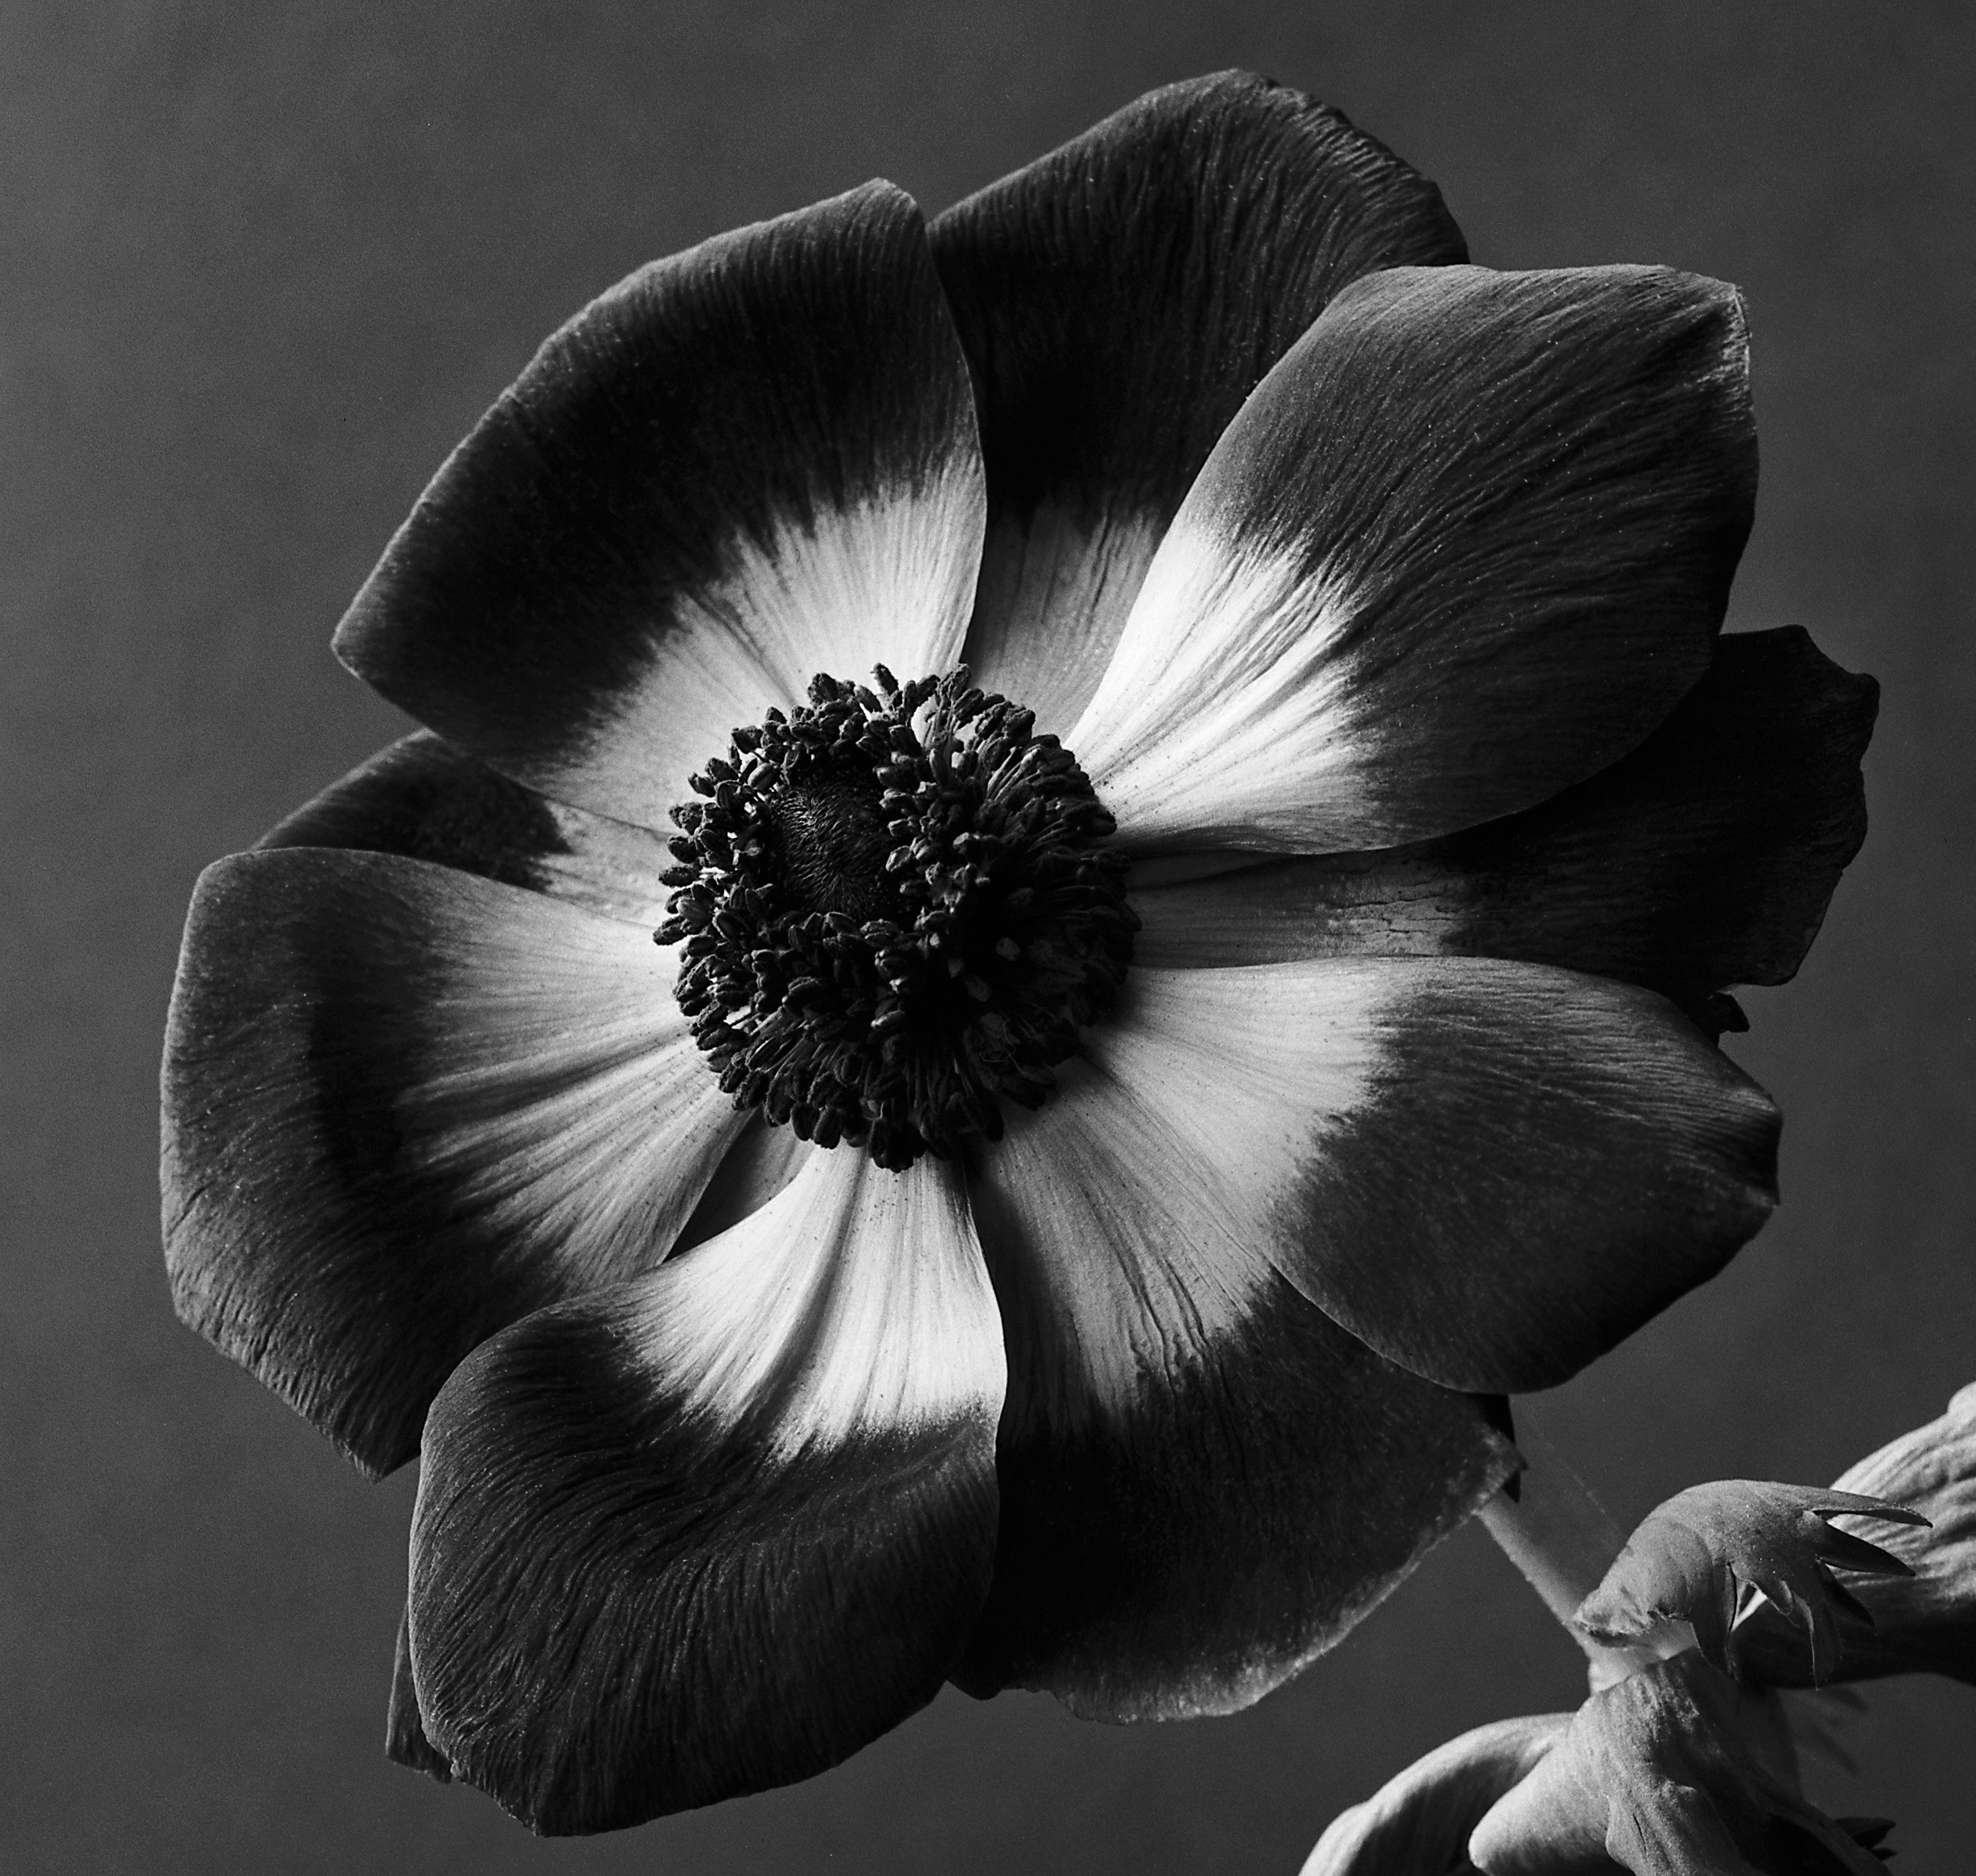  Anemone - Analogue black and white floral photography, edition of 20 - Contemporary Photograph by Ugne Pouwell